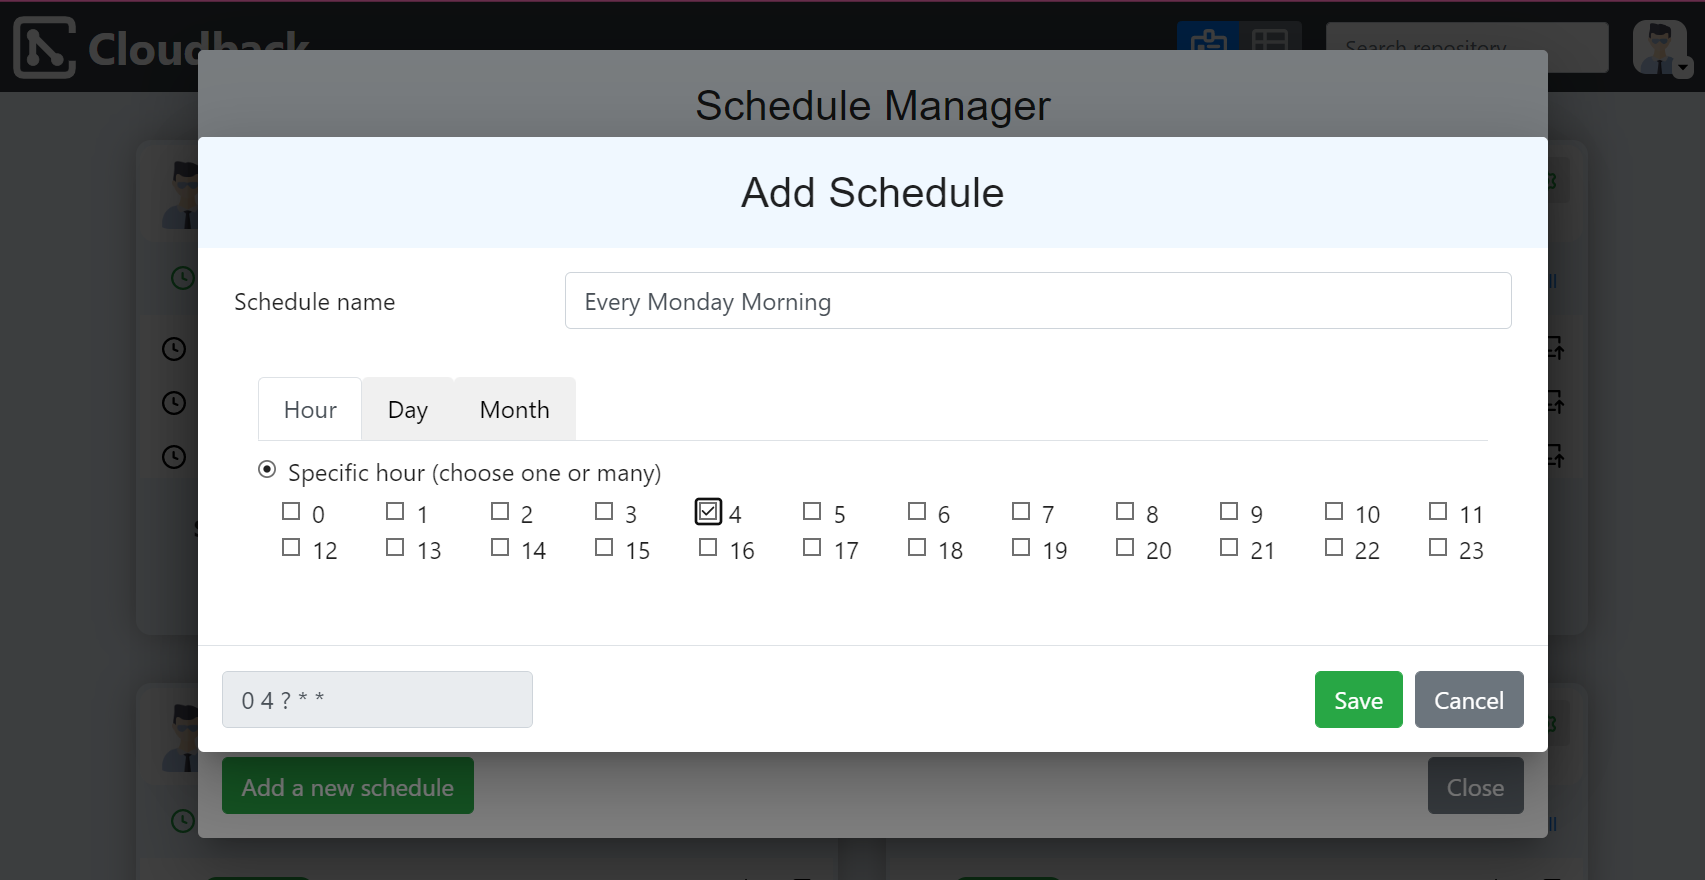 Add new schedule to backup GitHub repository